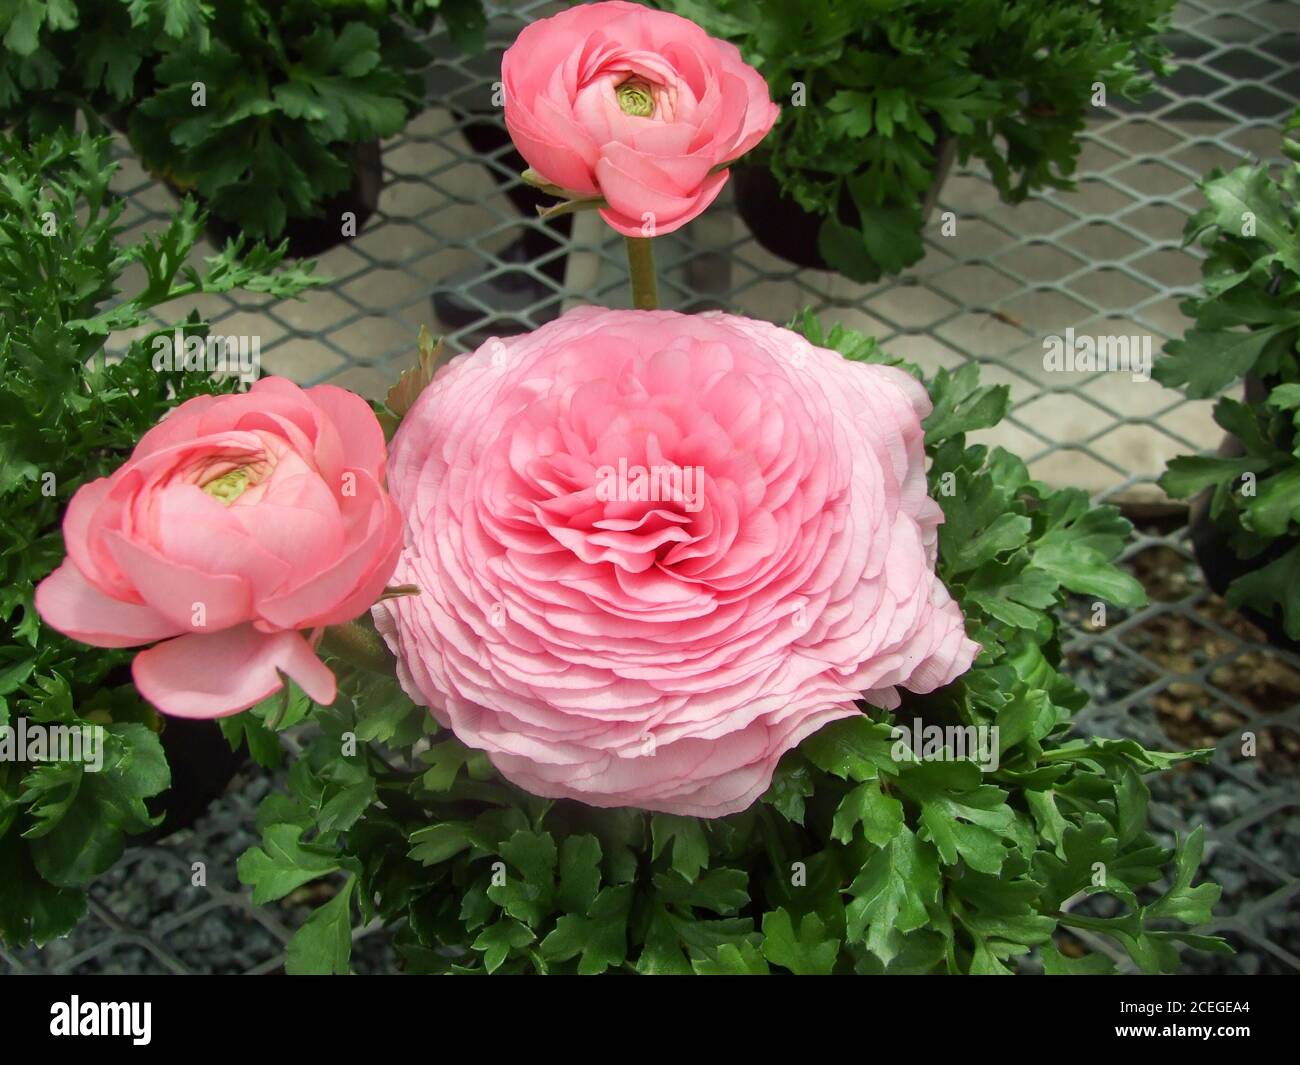 Ranunculus flora. A blossomed rose flower with detailed petals shot, potted plant Stock Photo